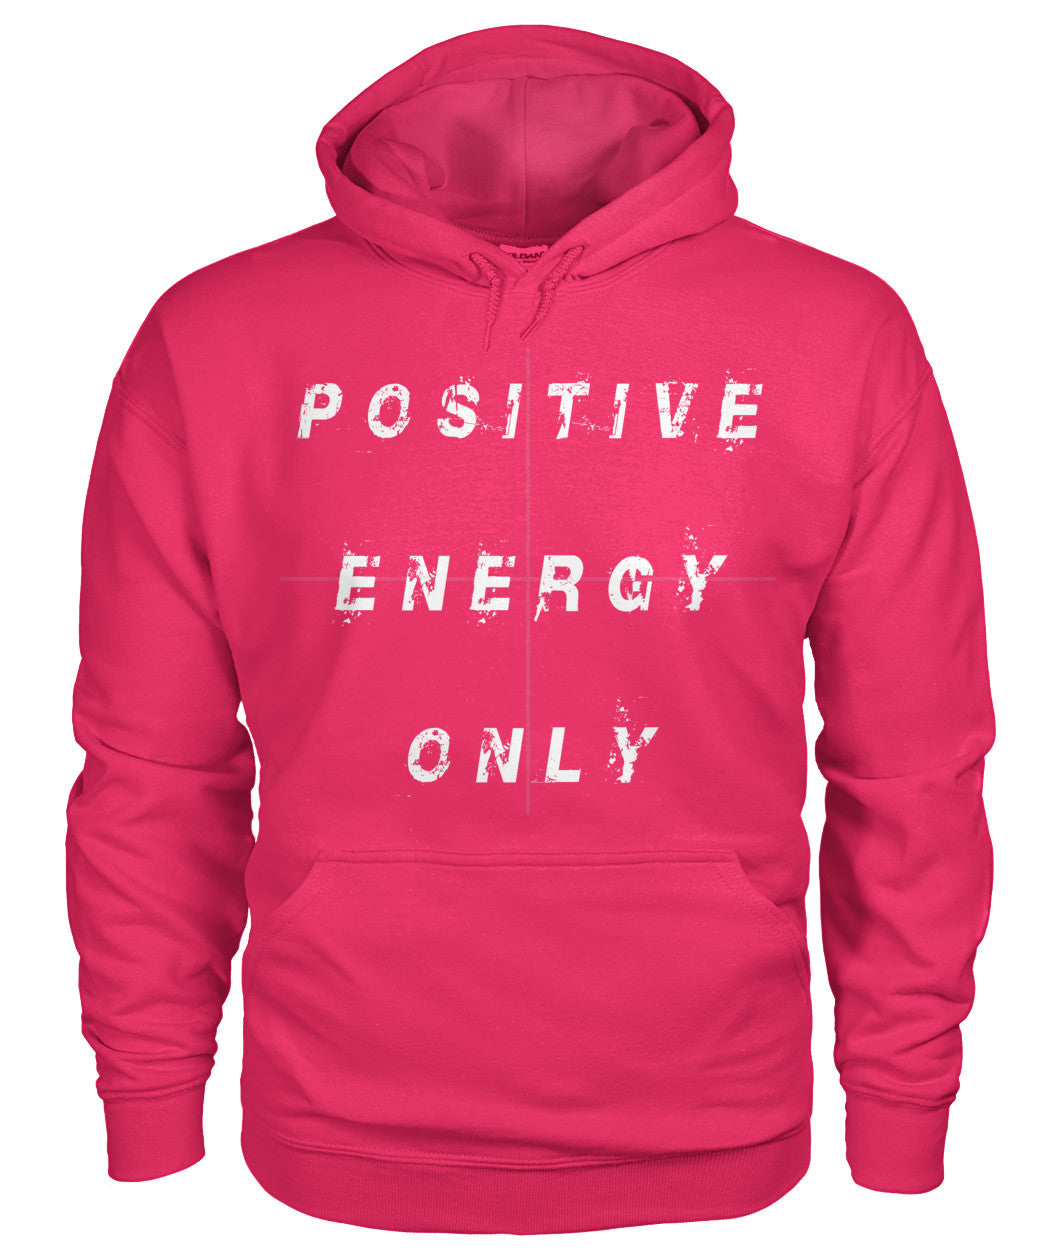 Positive Energy Only (Hoodies)